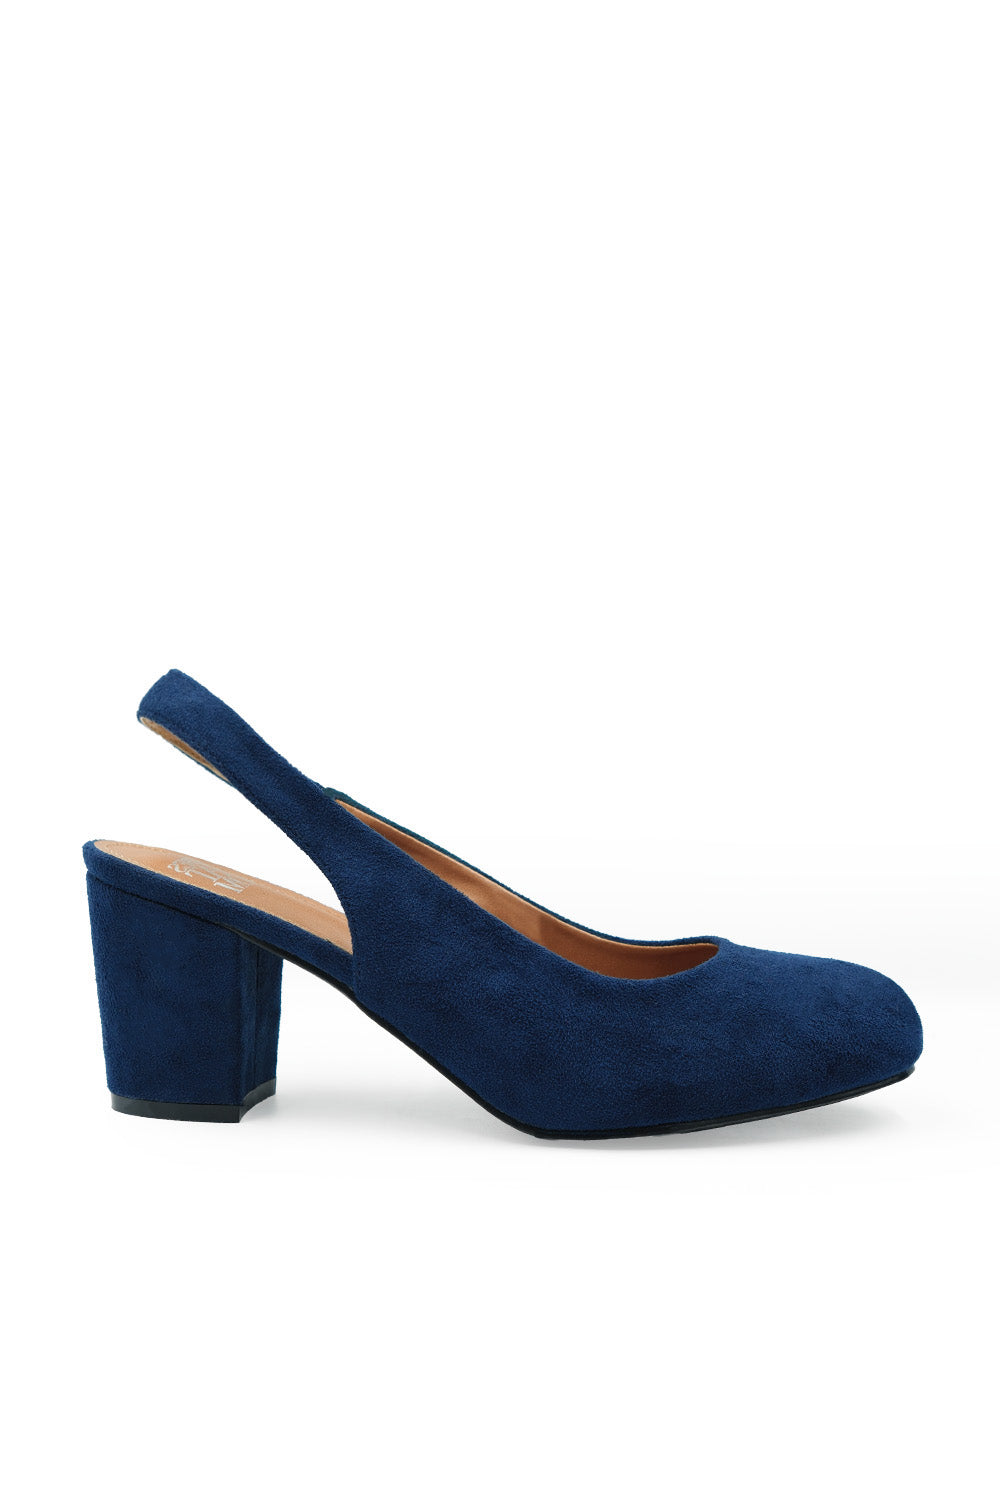 EDITH EXTRA WIDE FIT BLOCK HEEL SLINGBACK SHOES IN NAVY SUEDE